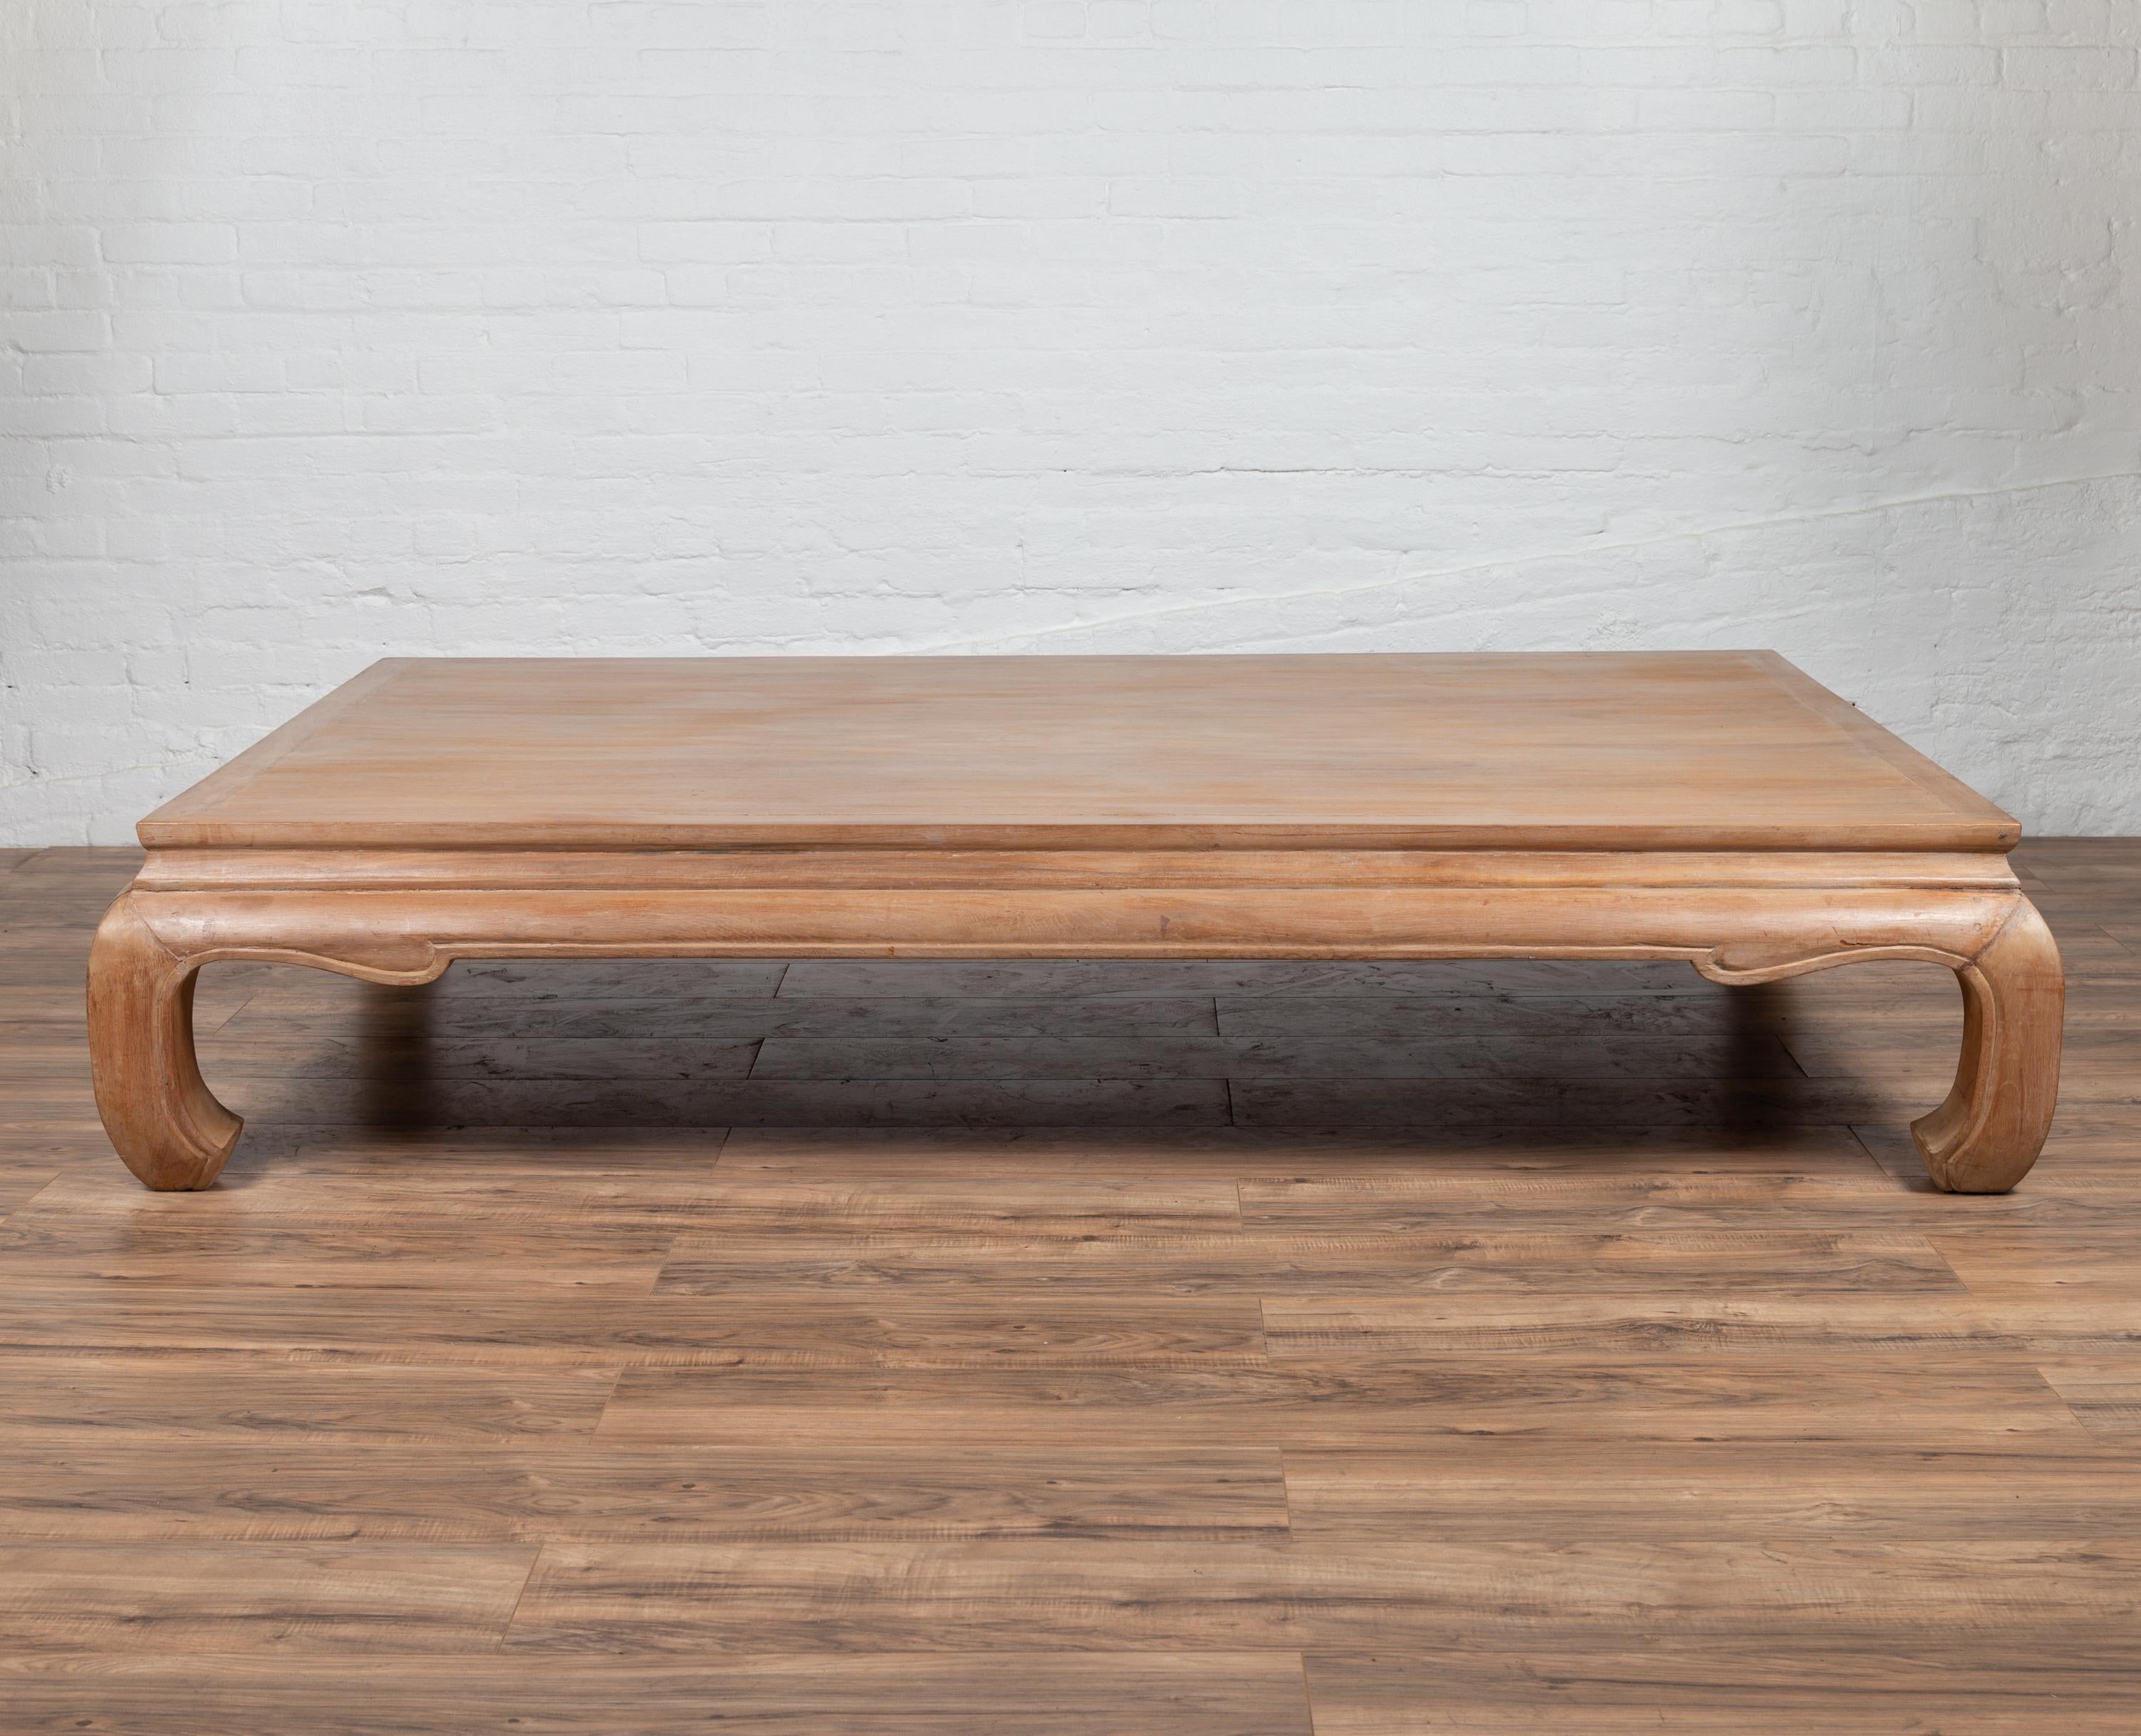 A vintage Thai teak wood coffee table from the late 20th century, with white wash finish and bulging chow legs. Born in Thailand, this elegant teak wood coffee table features a rectangular top sitting above a waisted apron with curving accents, the